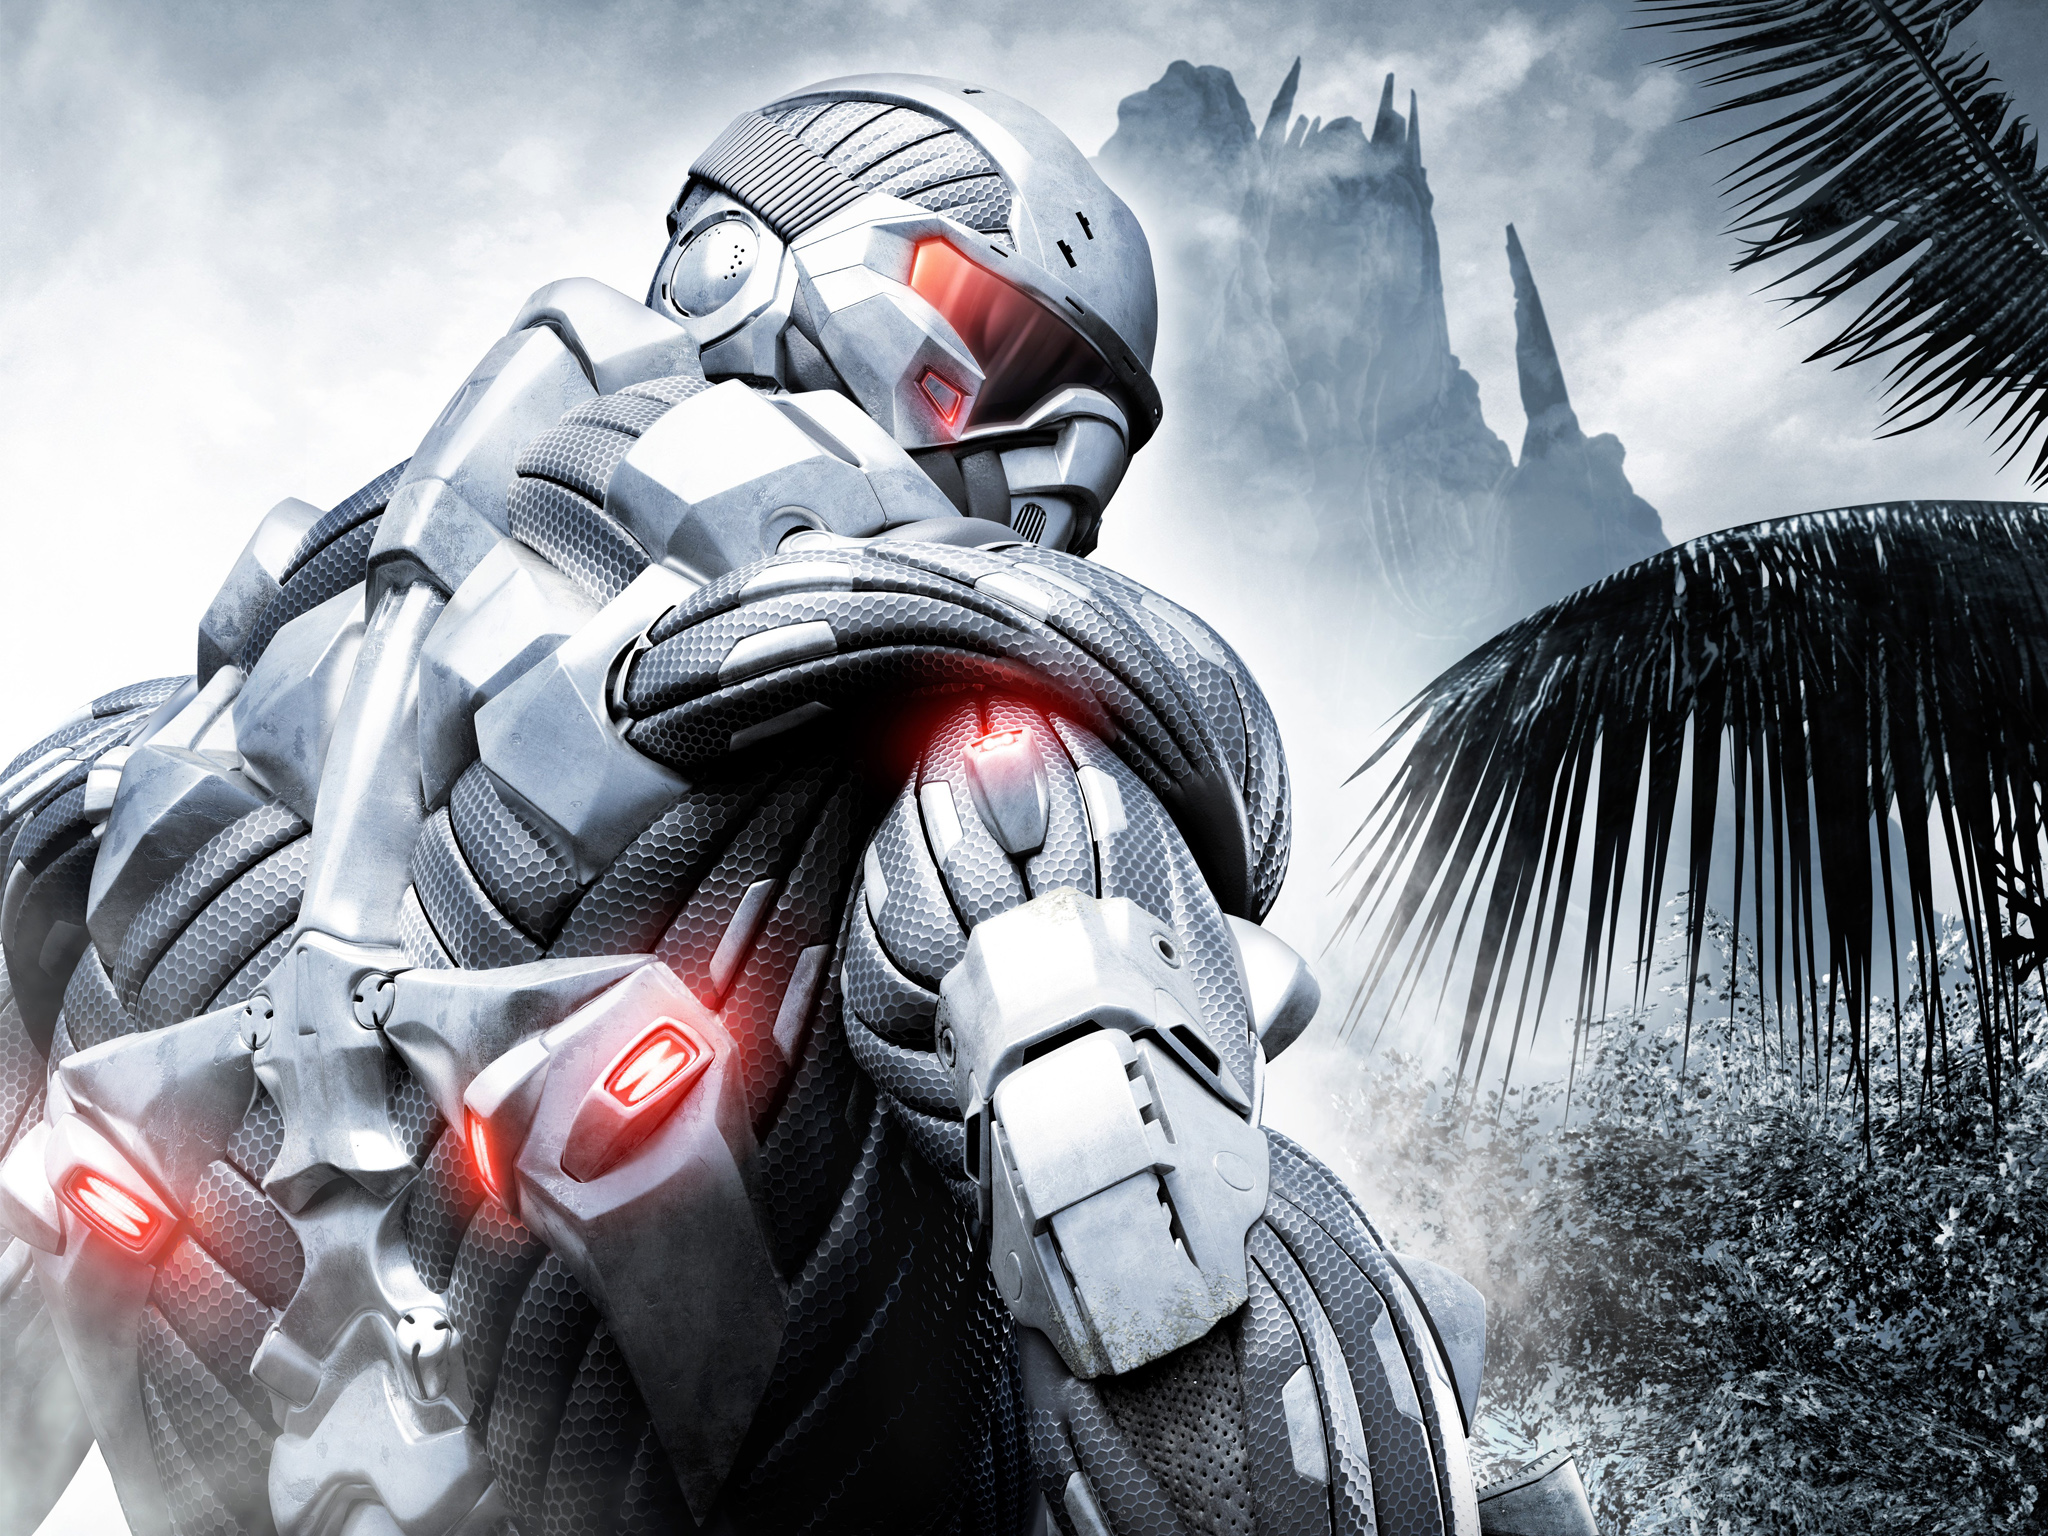 Crysis Official Wallpaper HD